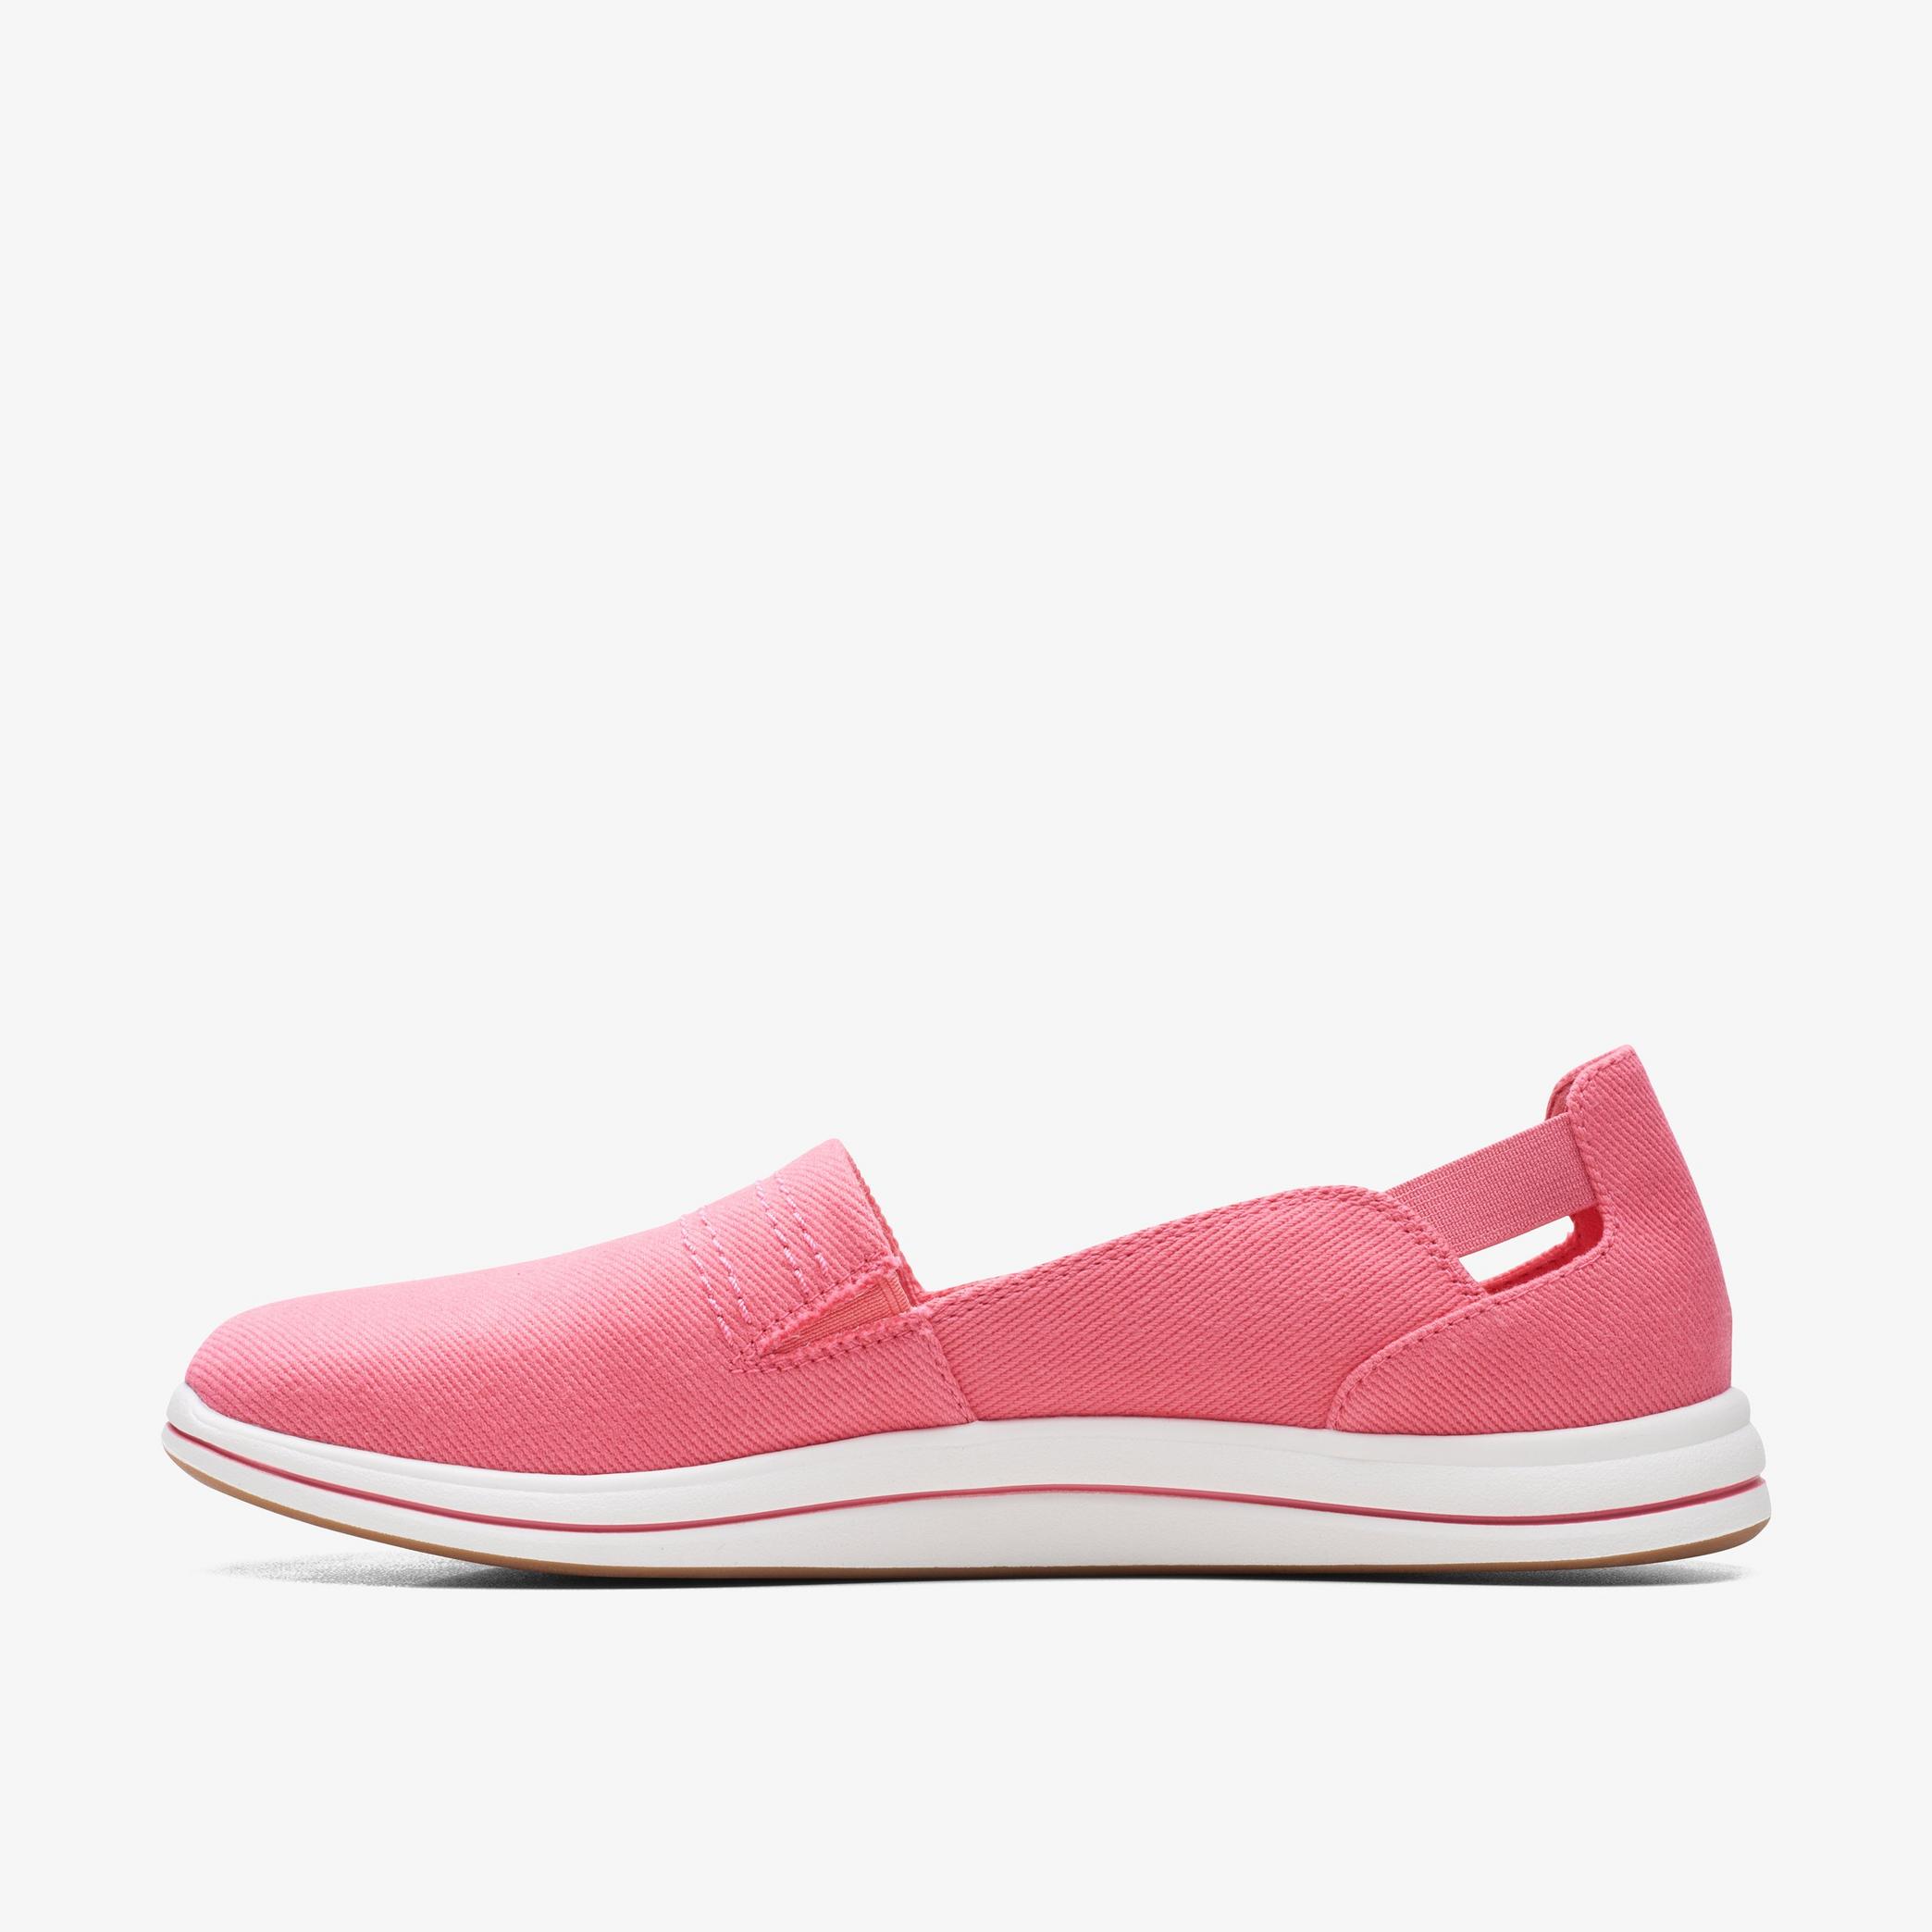 WOMENS Brinkley Step Coral Trouser Shoes | Clarks Outlet